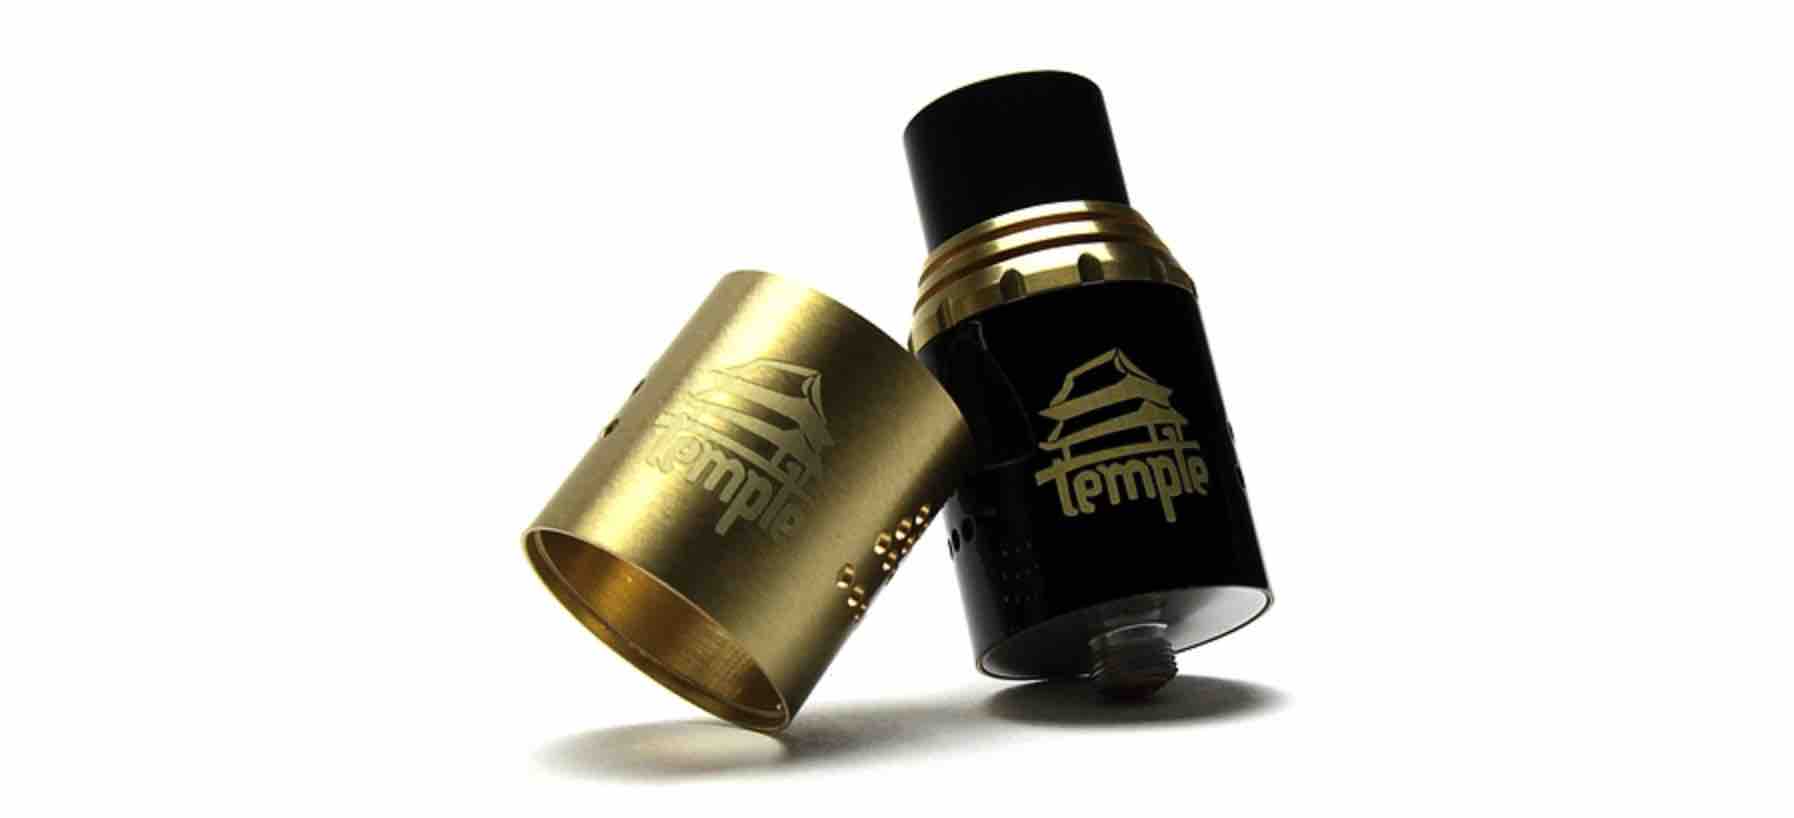 Temple-Styled-RDA-colors-image